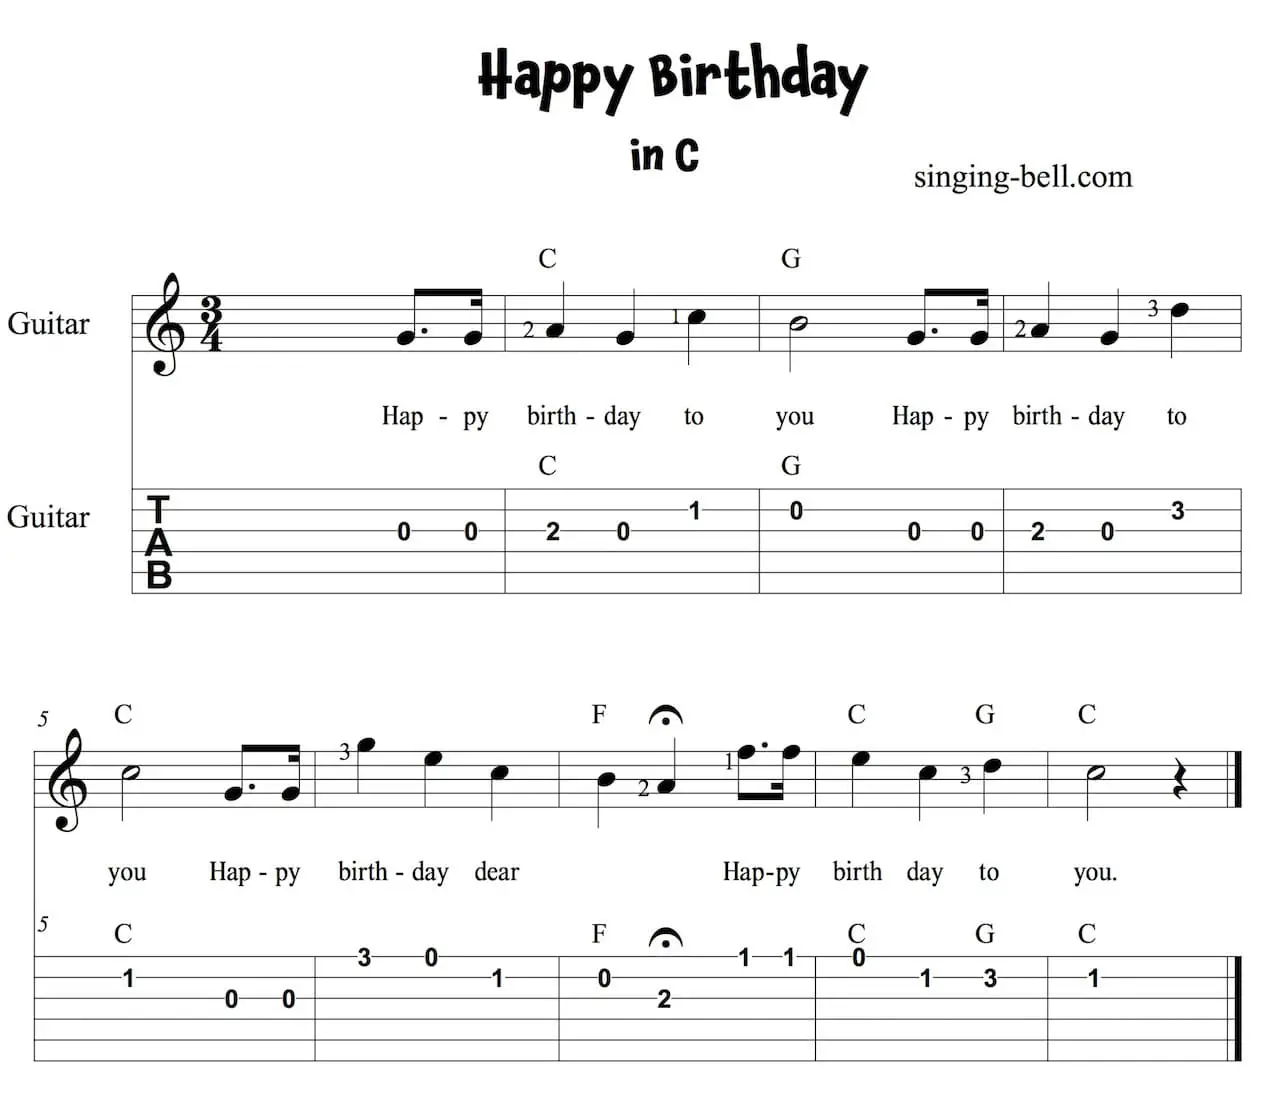 Happy Birthday - easy Guitar Sheet Music with Notes and Tablature in C - version 1.